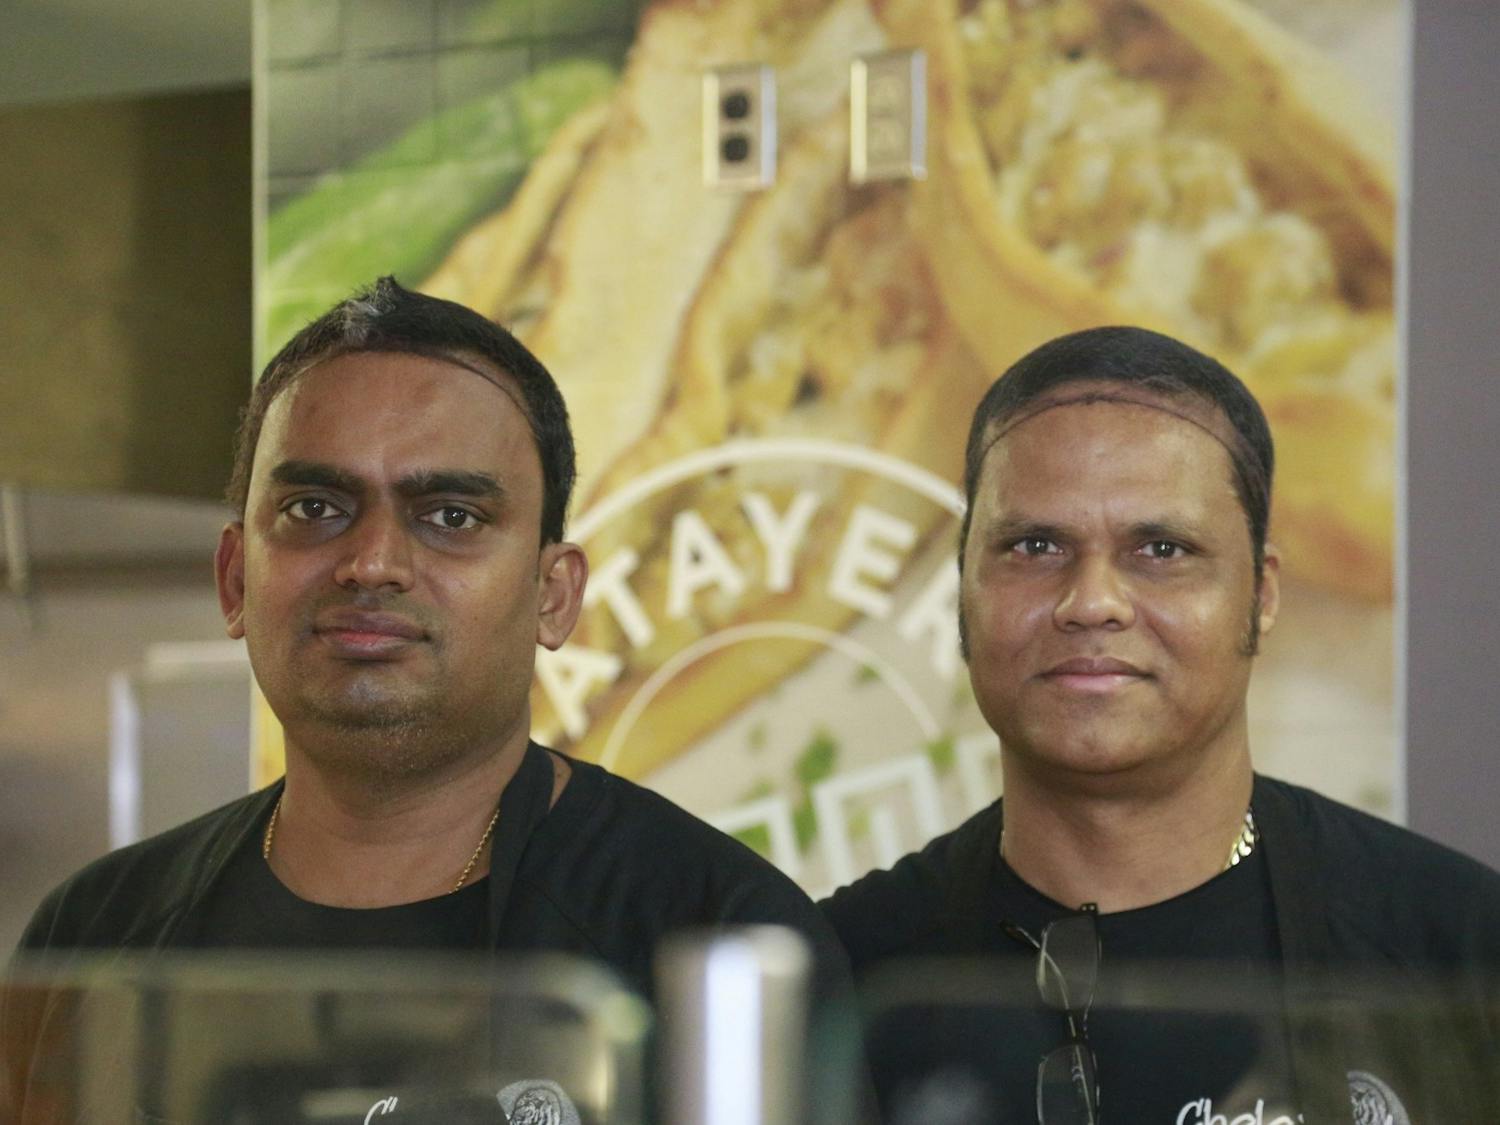 Wednesday morning on Februrary 5, 2020, Raja and Durai prepare to open CholaNad, a restaurant in the bottom of Lenoir. They are from Tamil Nadu, a region that inspires many CholaNad dishes.